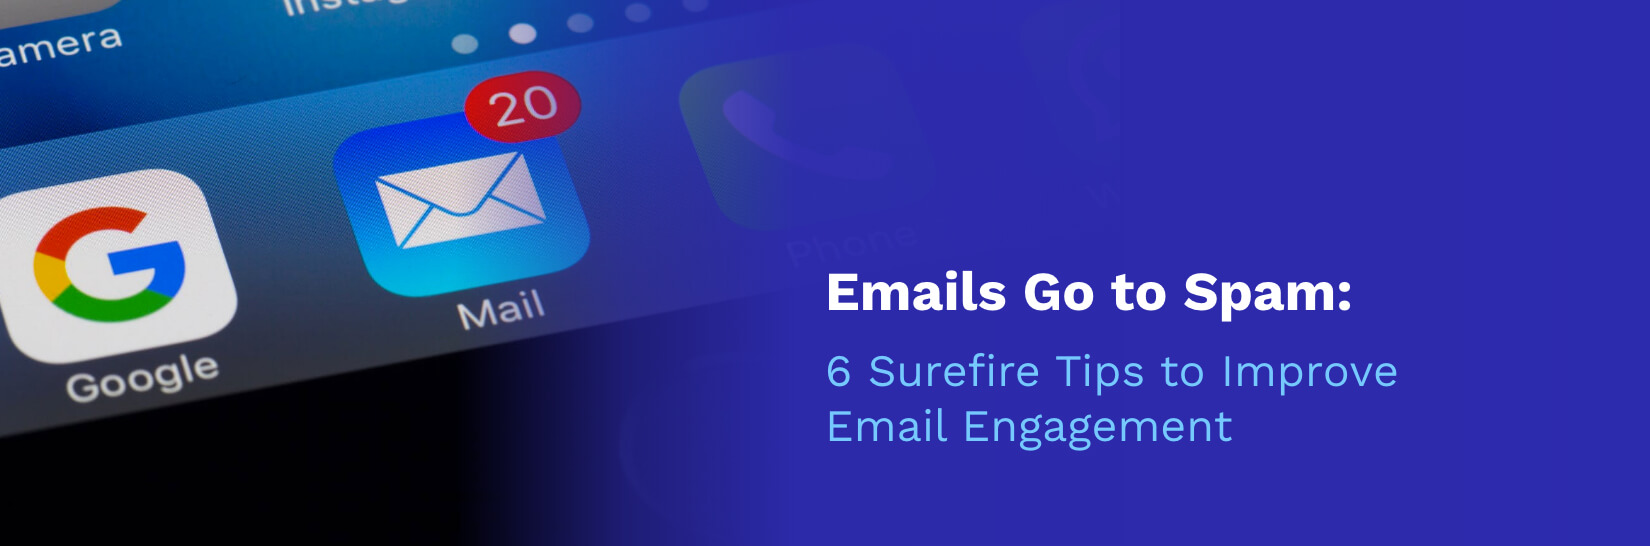 Emails Go to Spam: 6 Surefire Tips to Improve Email Engagement